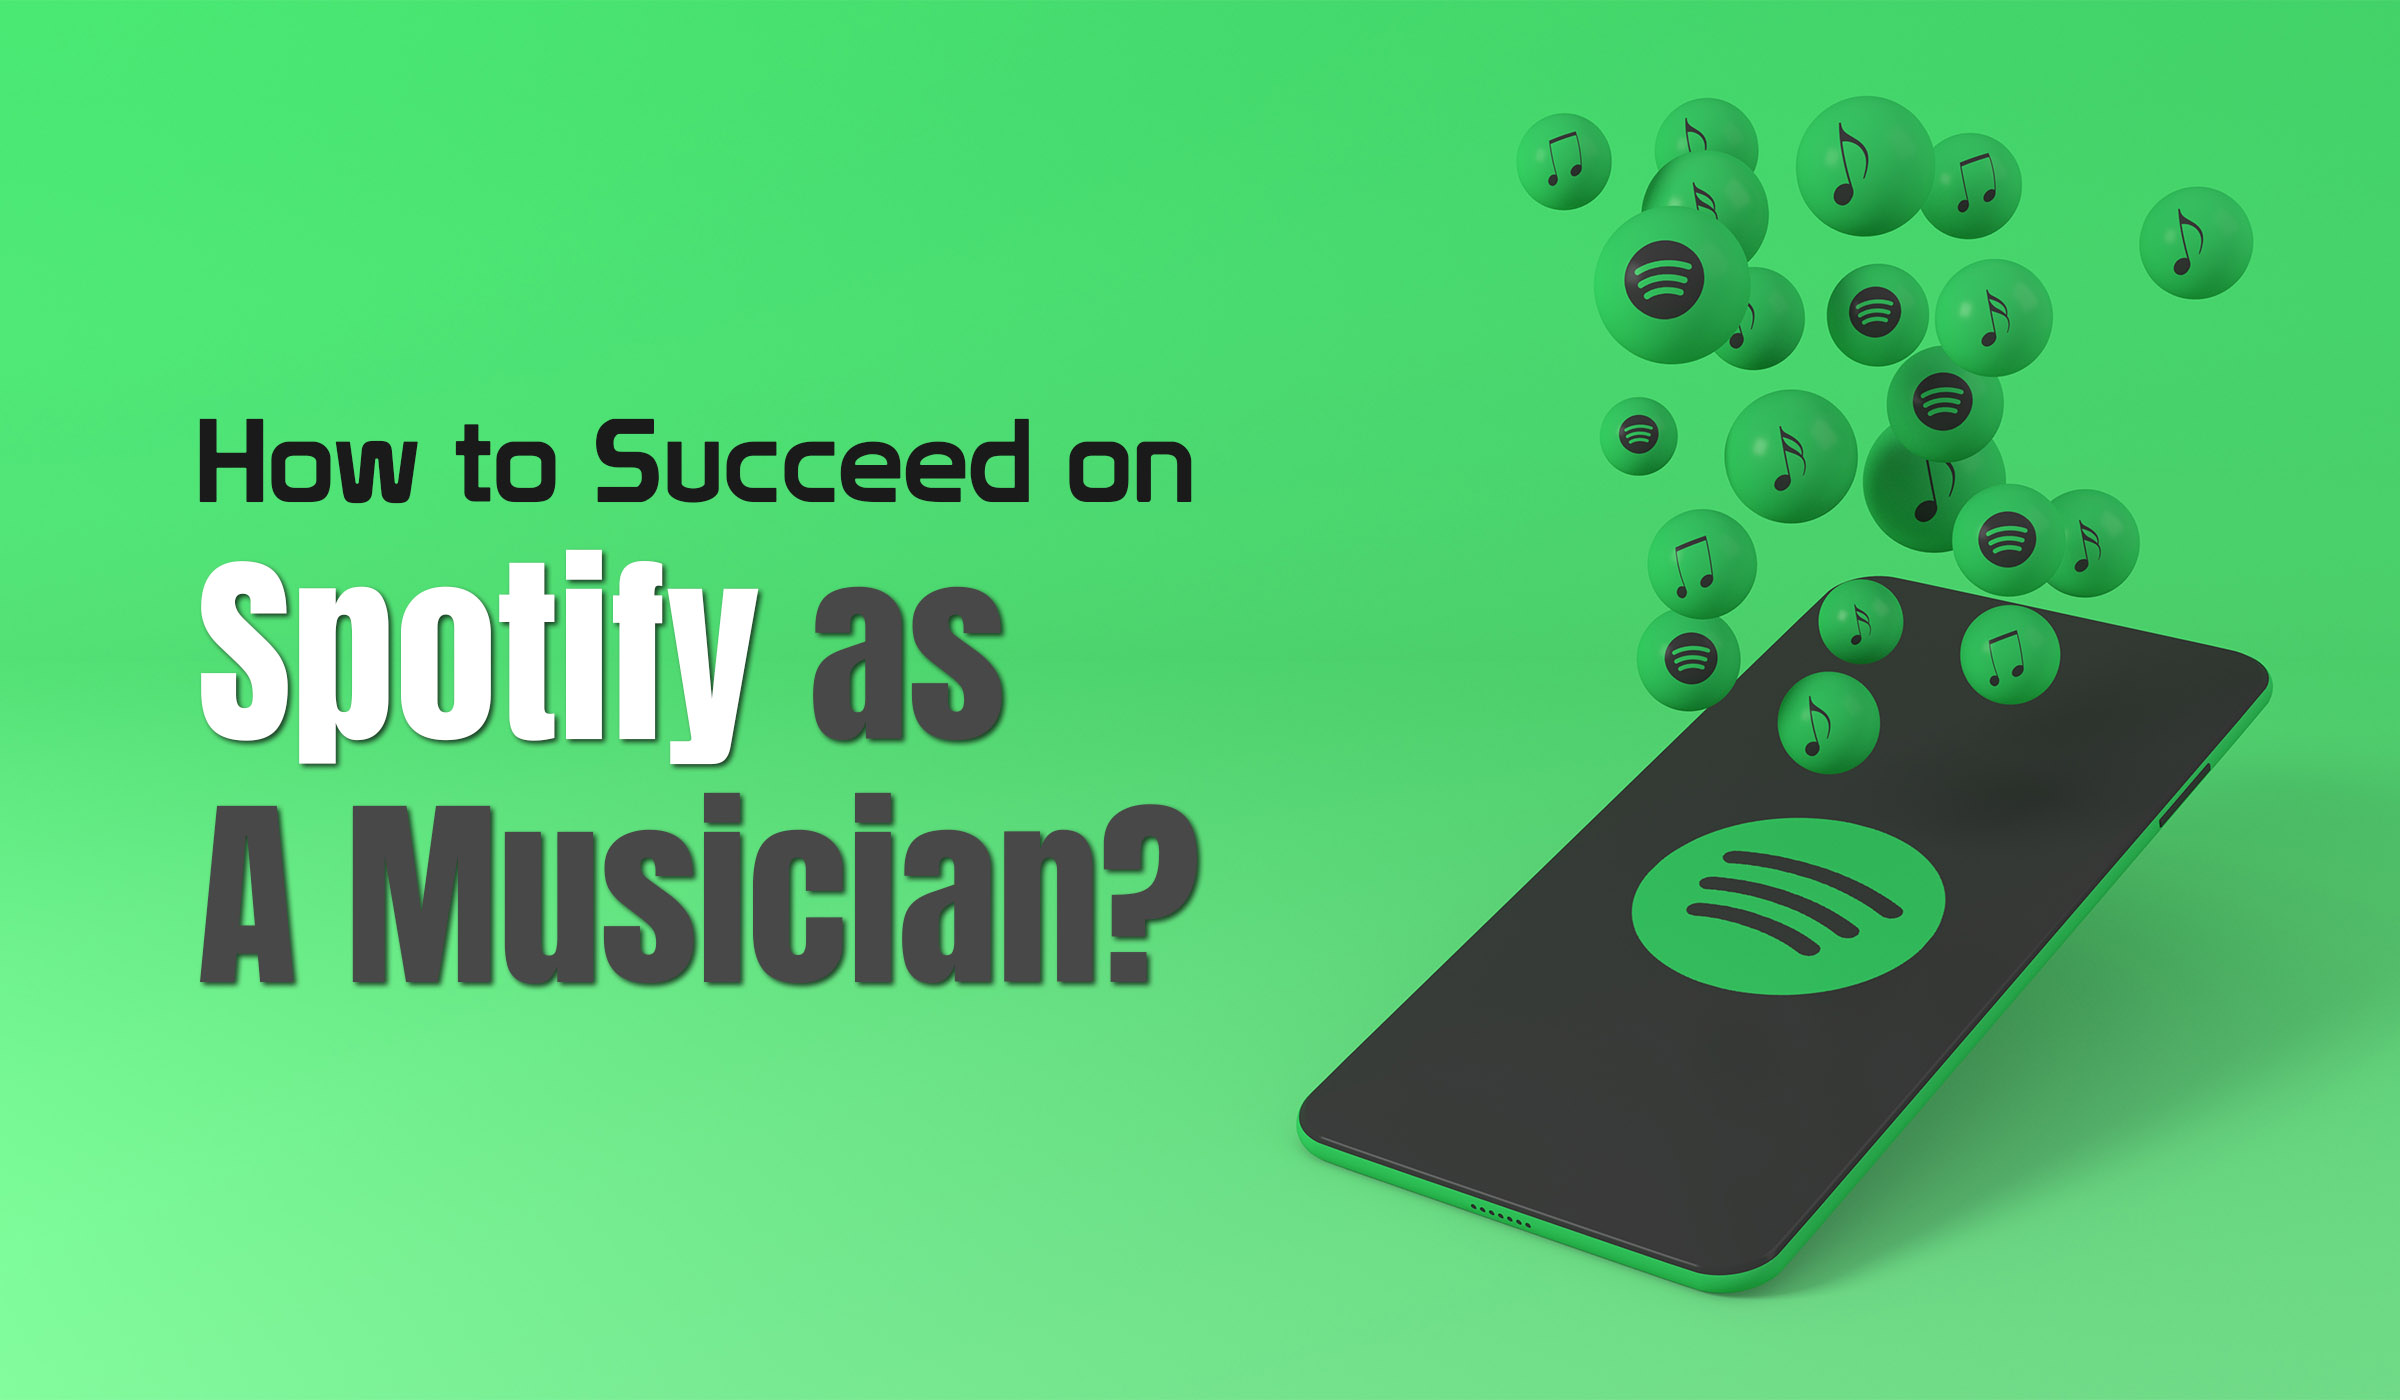 How to Succeed on Spotify as A Musician? - Social Media Blogs For Influencers, Gamers, Musicians, Artists